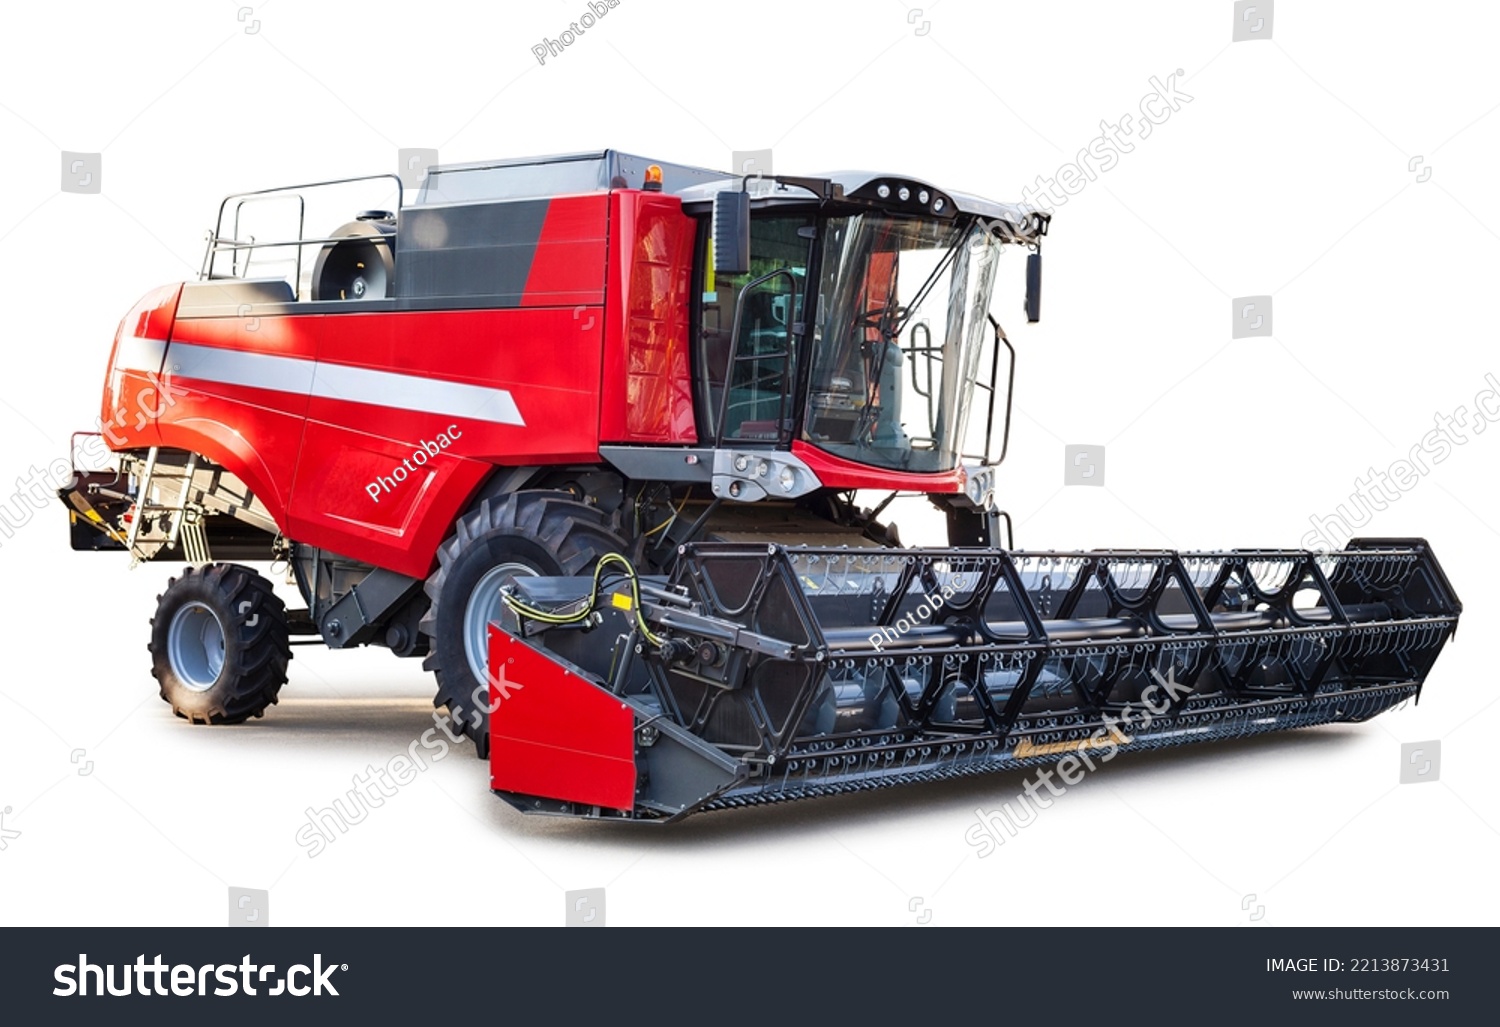 Red combine harvester, agriculture machinery, farming vehicle isolated over white, with clipping path. #2213873431